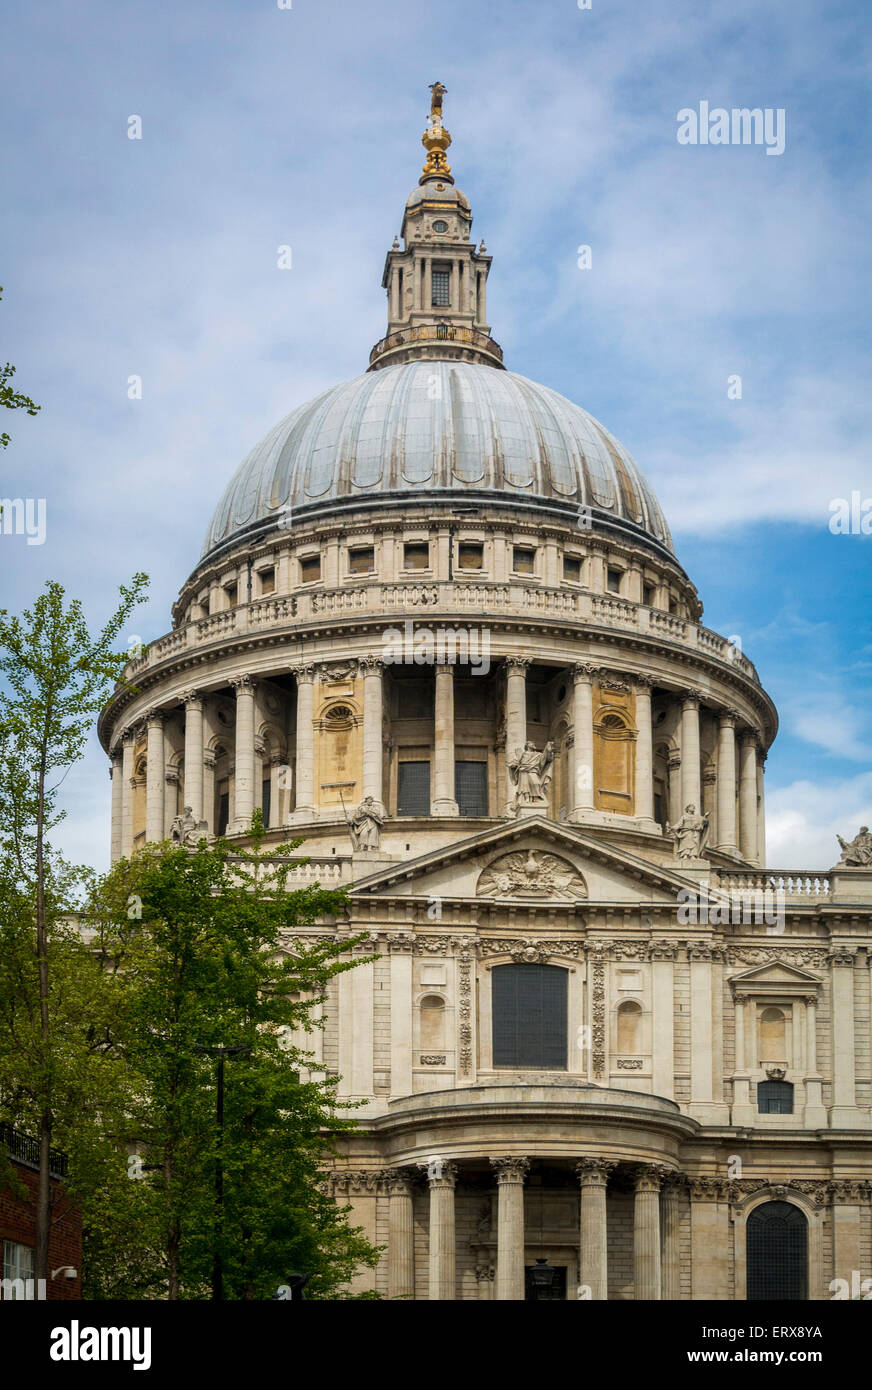 South façade of St Paul's Cathedral, London, UK. Stock Photo